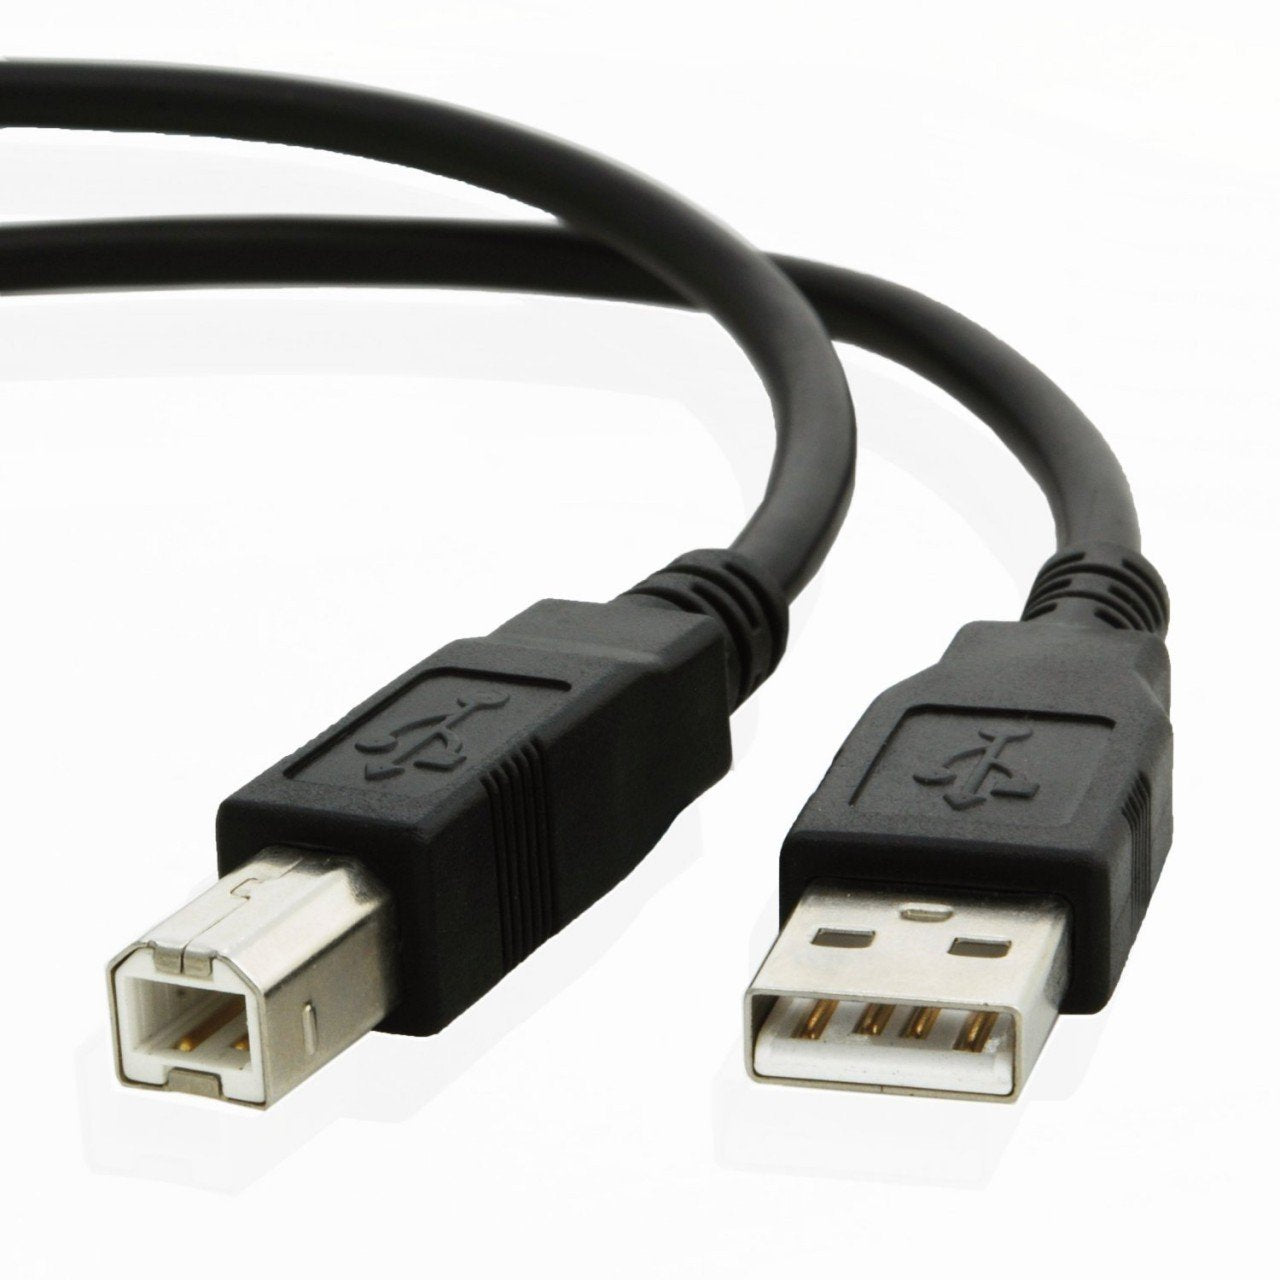 USB cable for Canon ISENSYS MF732Cdw